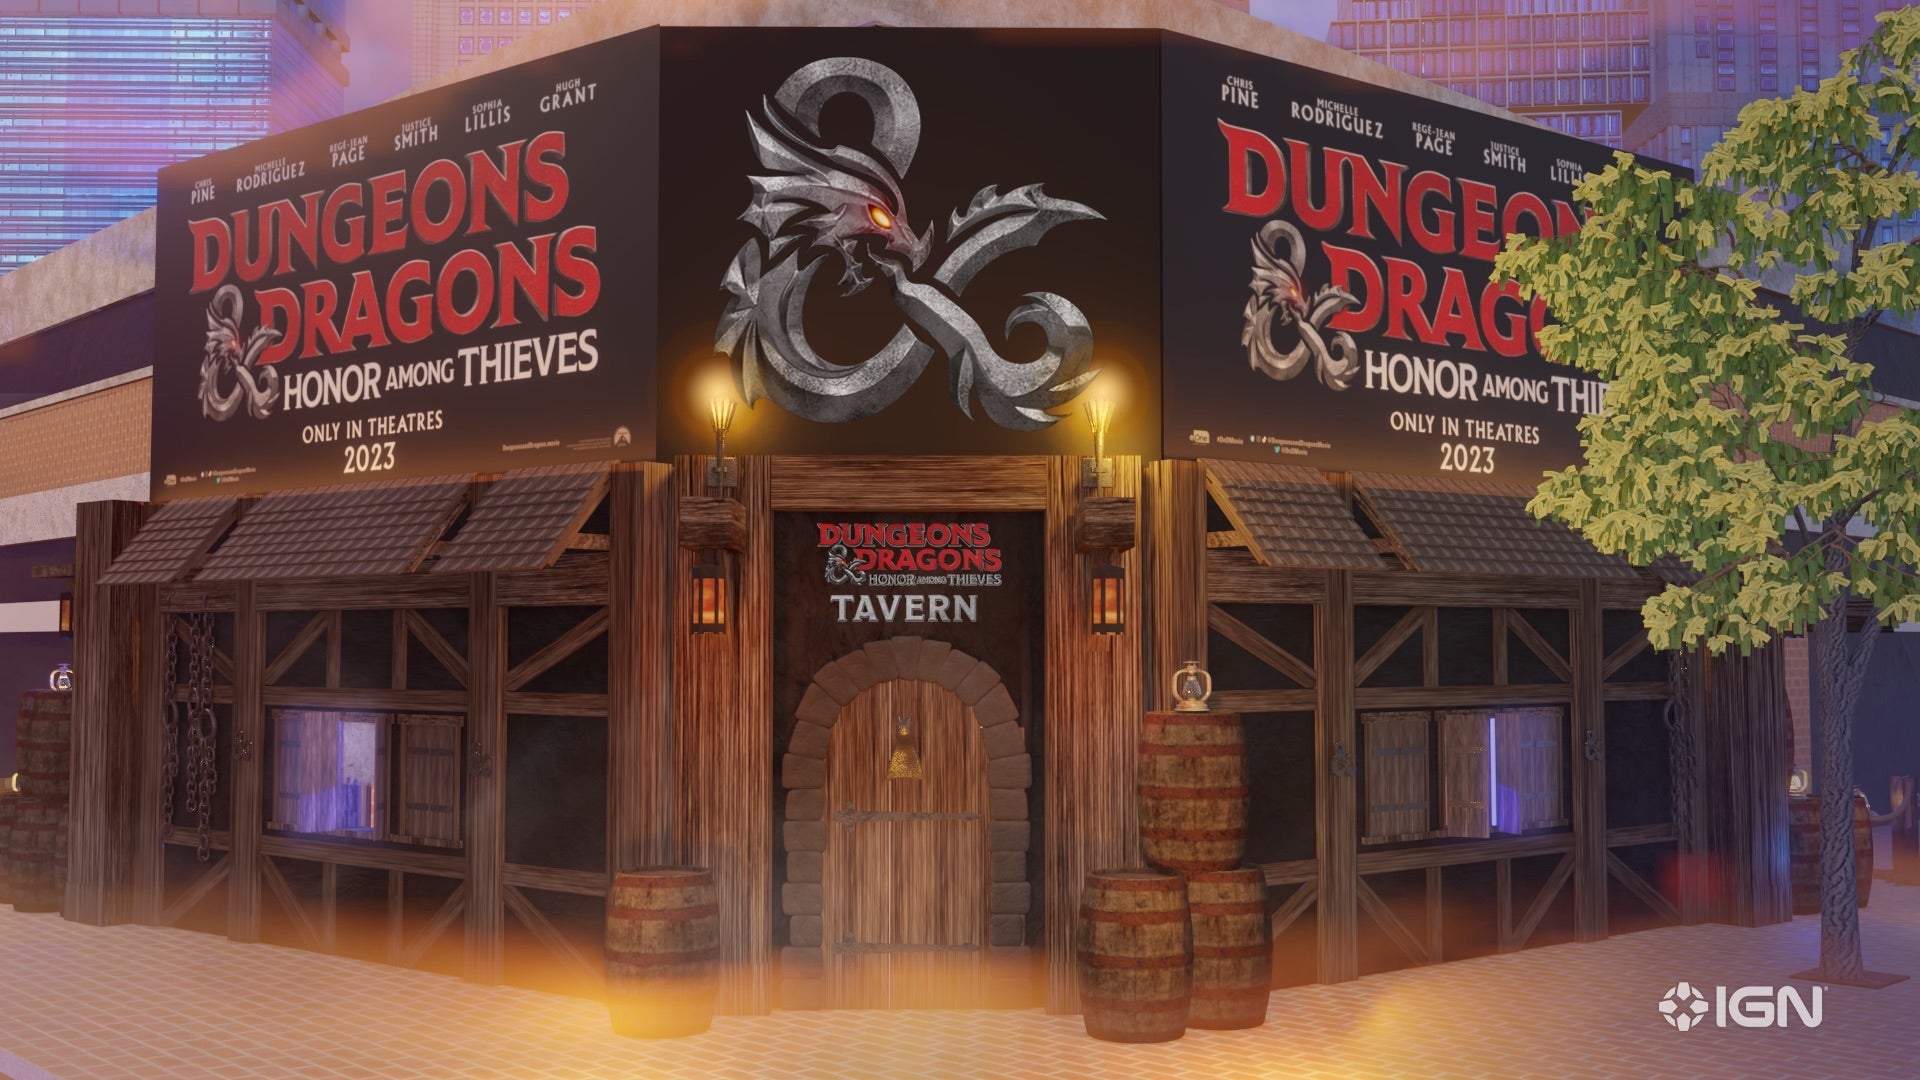 Dungeons & Dragons: Honor Among Thieves Comic Con Panel And Tavern Experience Officially Announced